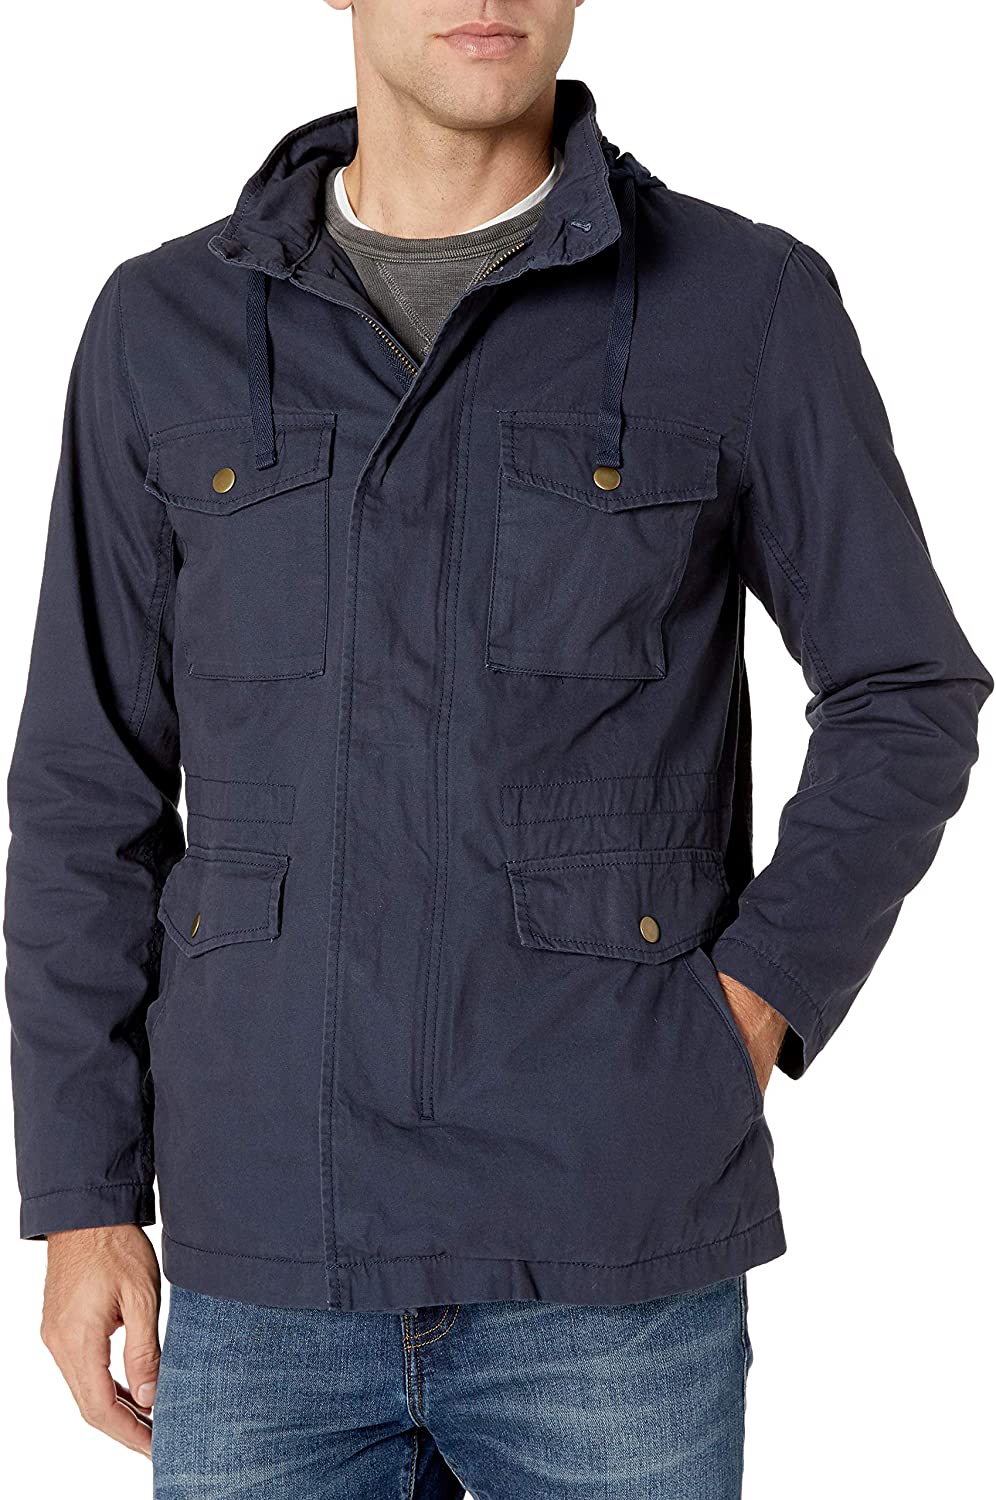 Amazon's Labor Day Deals: Fall Jackets and Winter Coats | Entertainment ...